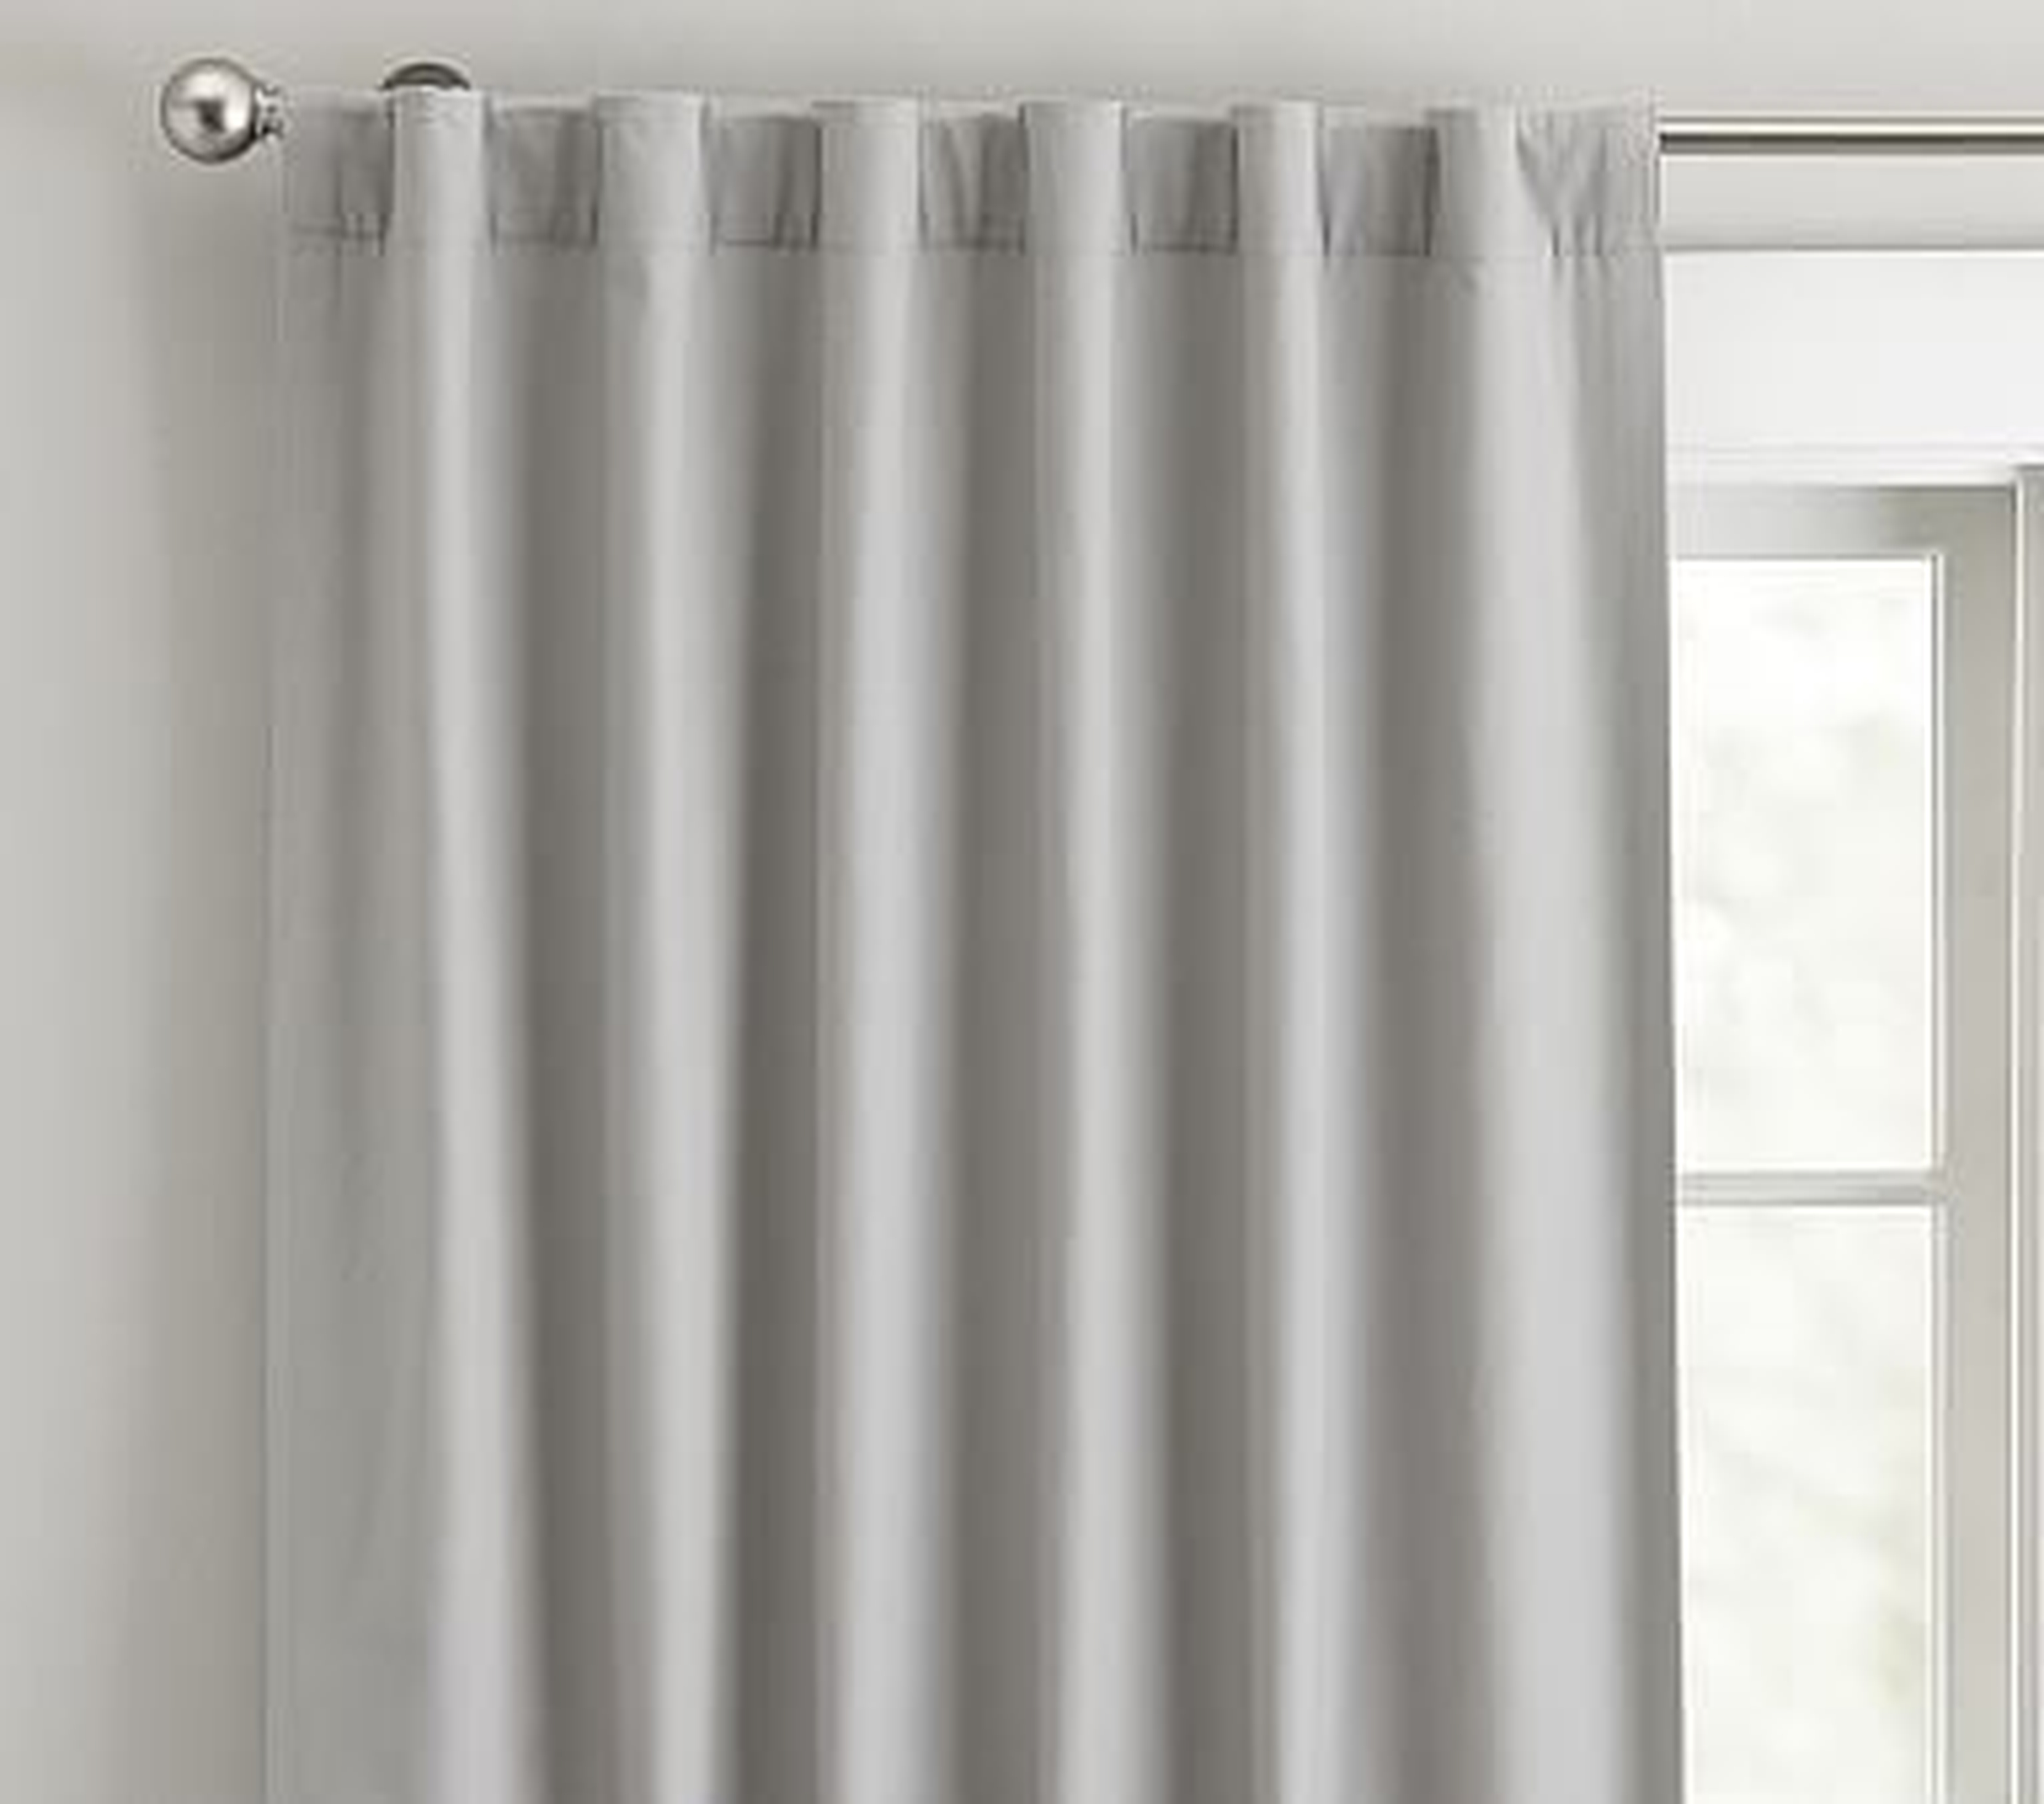 Quincy Cotton Canvas Blackout Panel, 63 Inches, Gray - Pottery Barn Kids